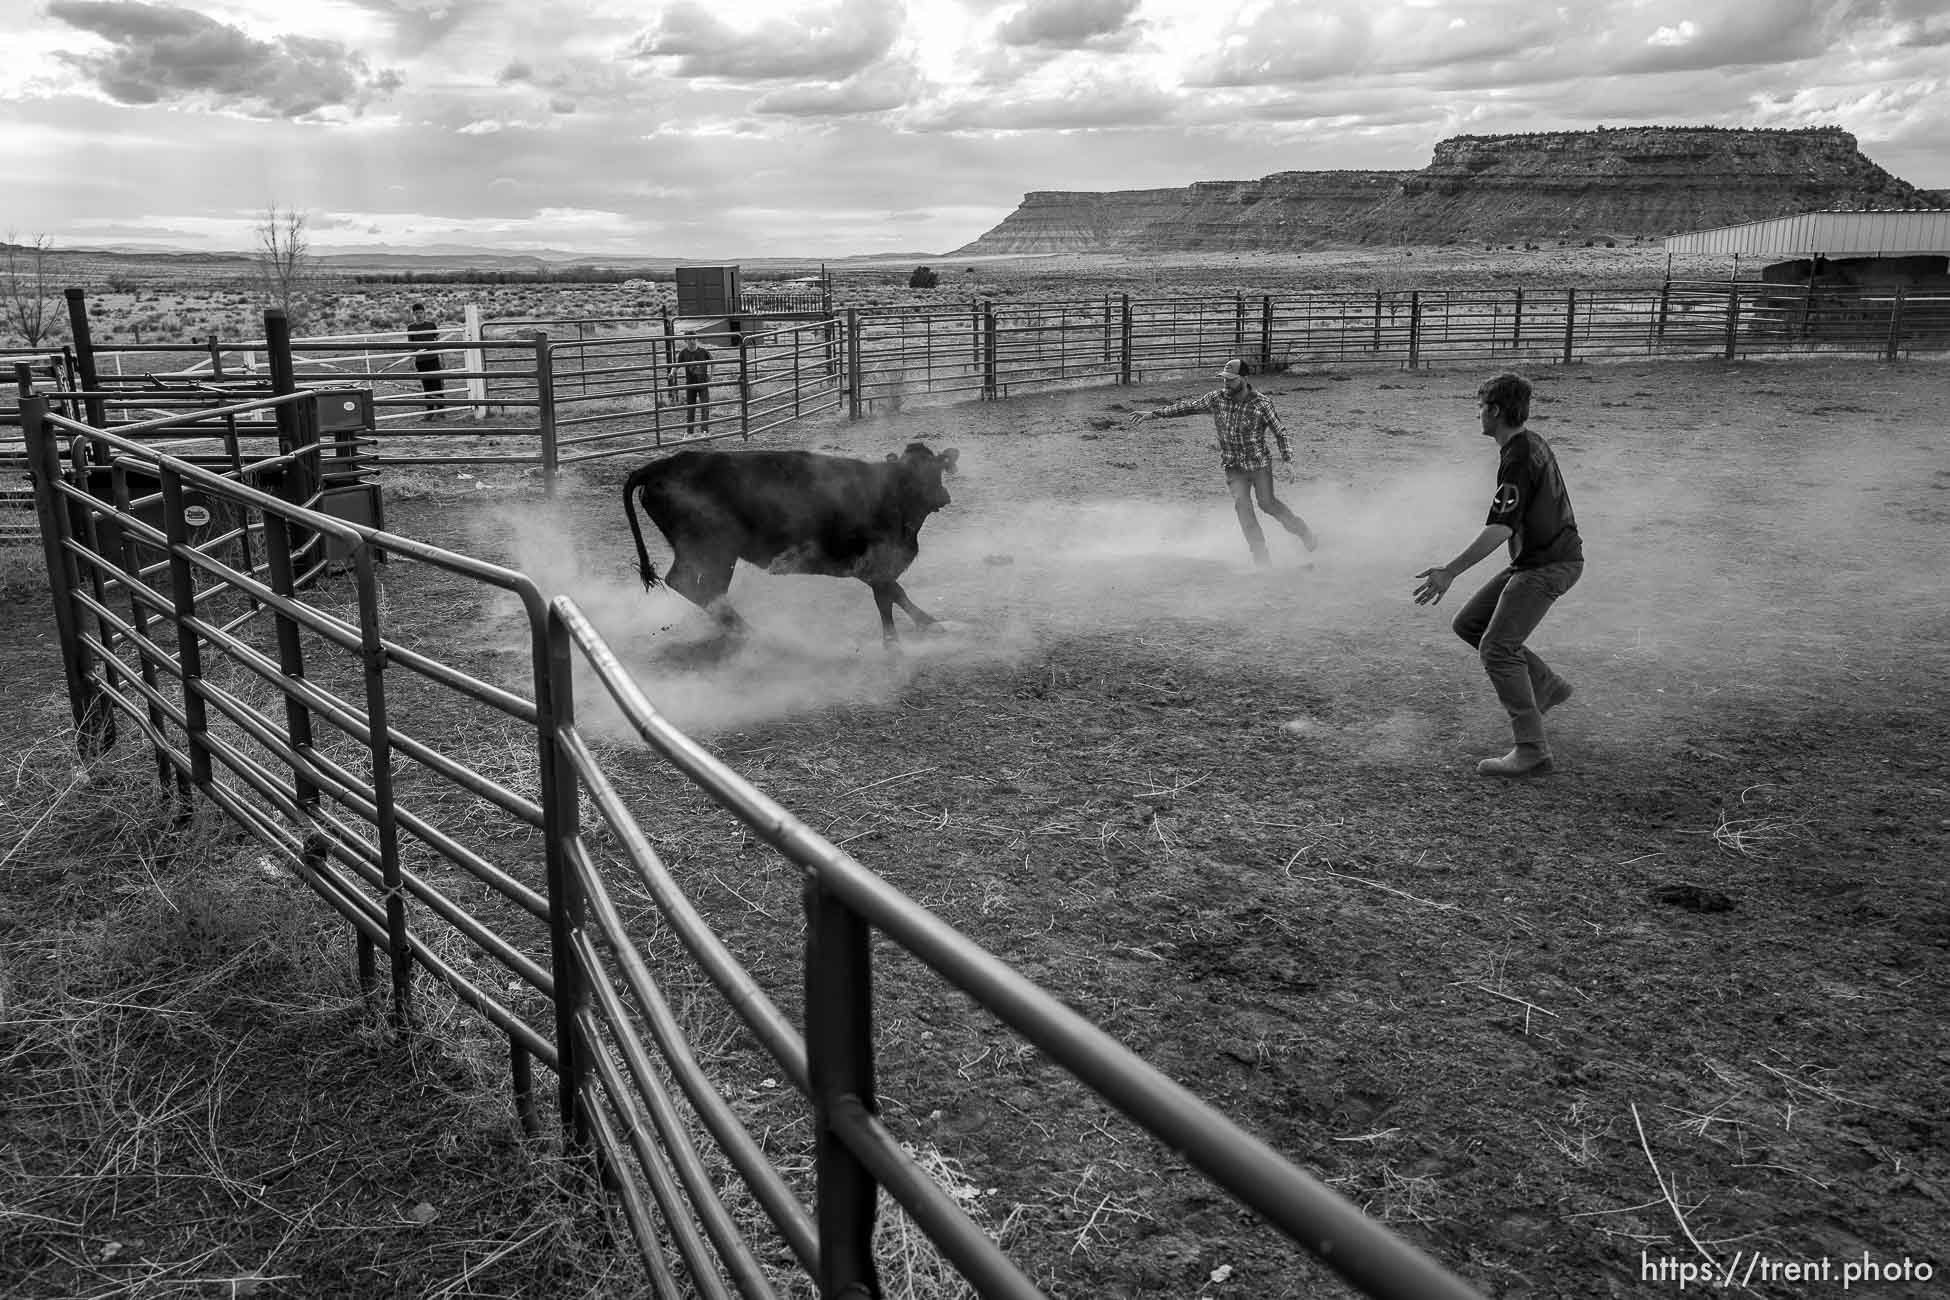 Cattle in the Chute